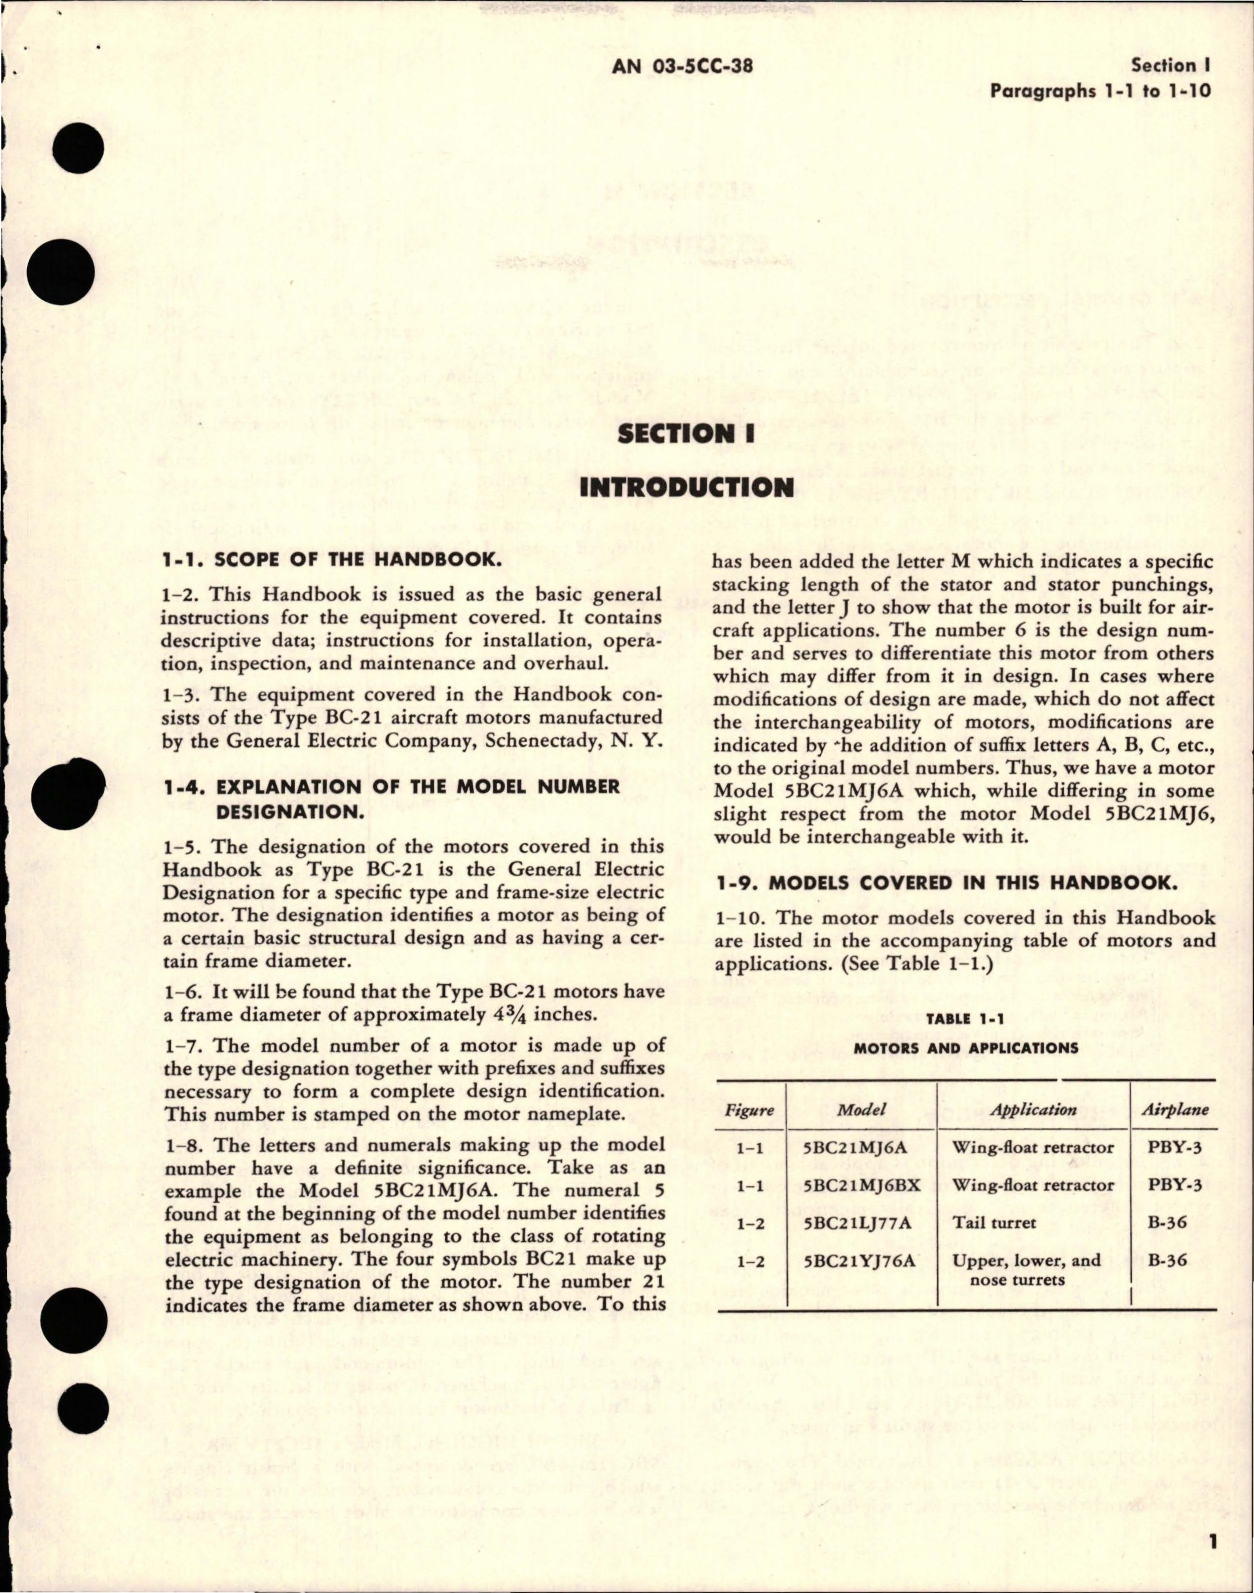 Sample page 5 from AirCorps Library document: Overhaul Instructions for Aircraft Motors - Series 5BC21 